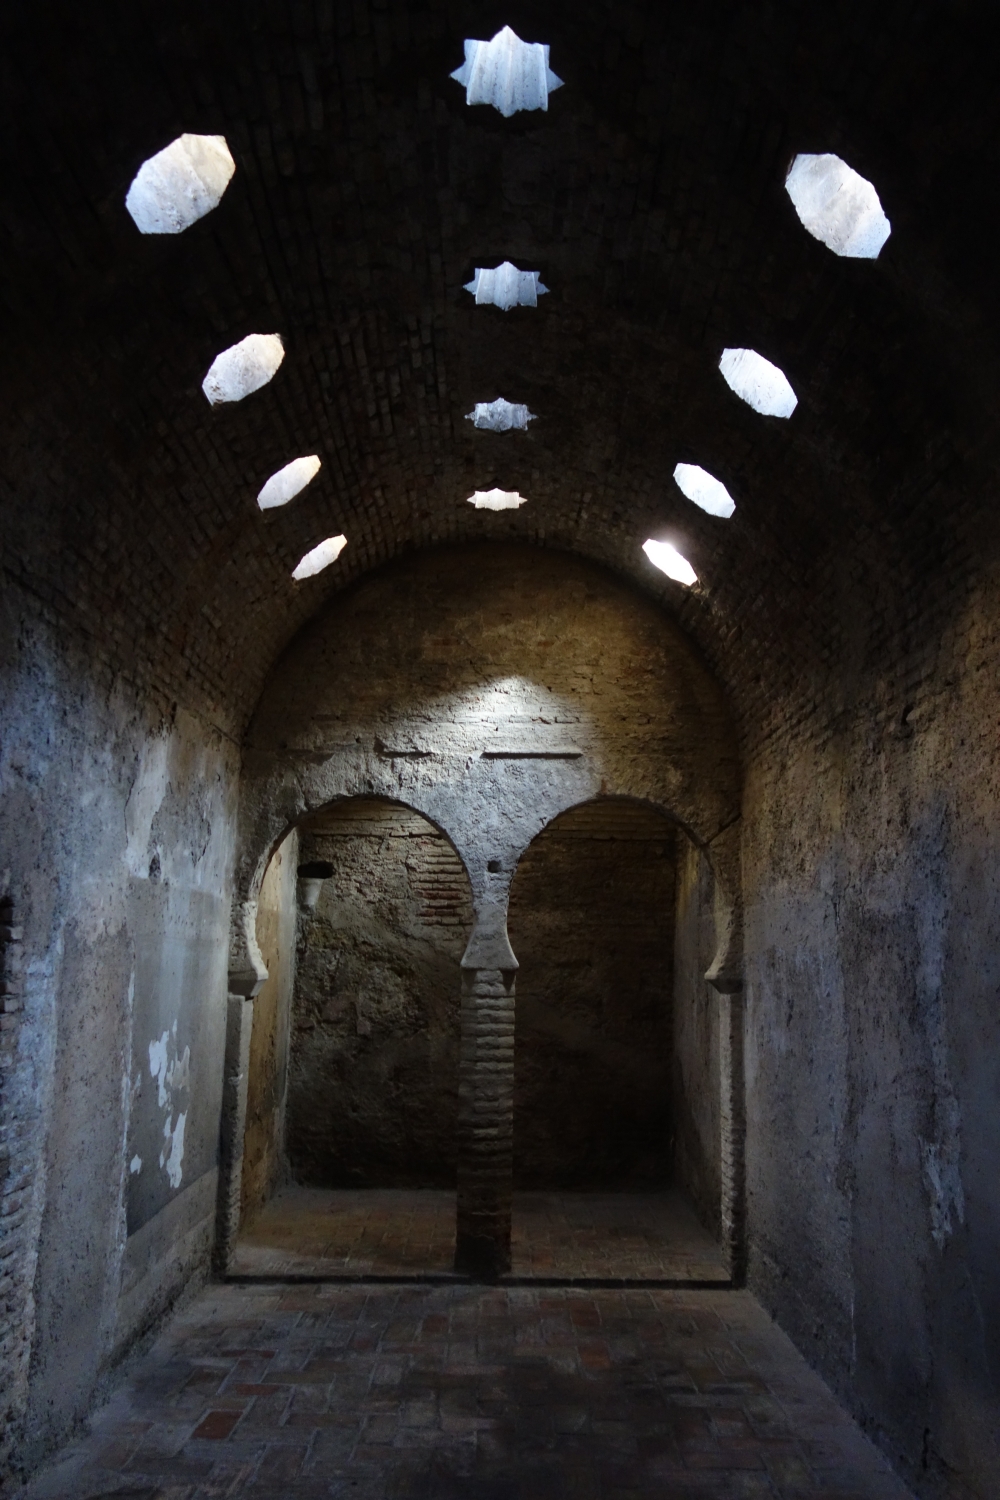 Interior, chamber with vaulted ceiling